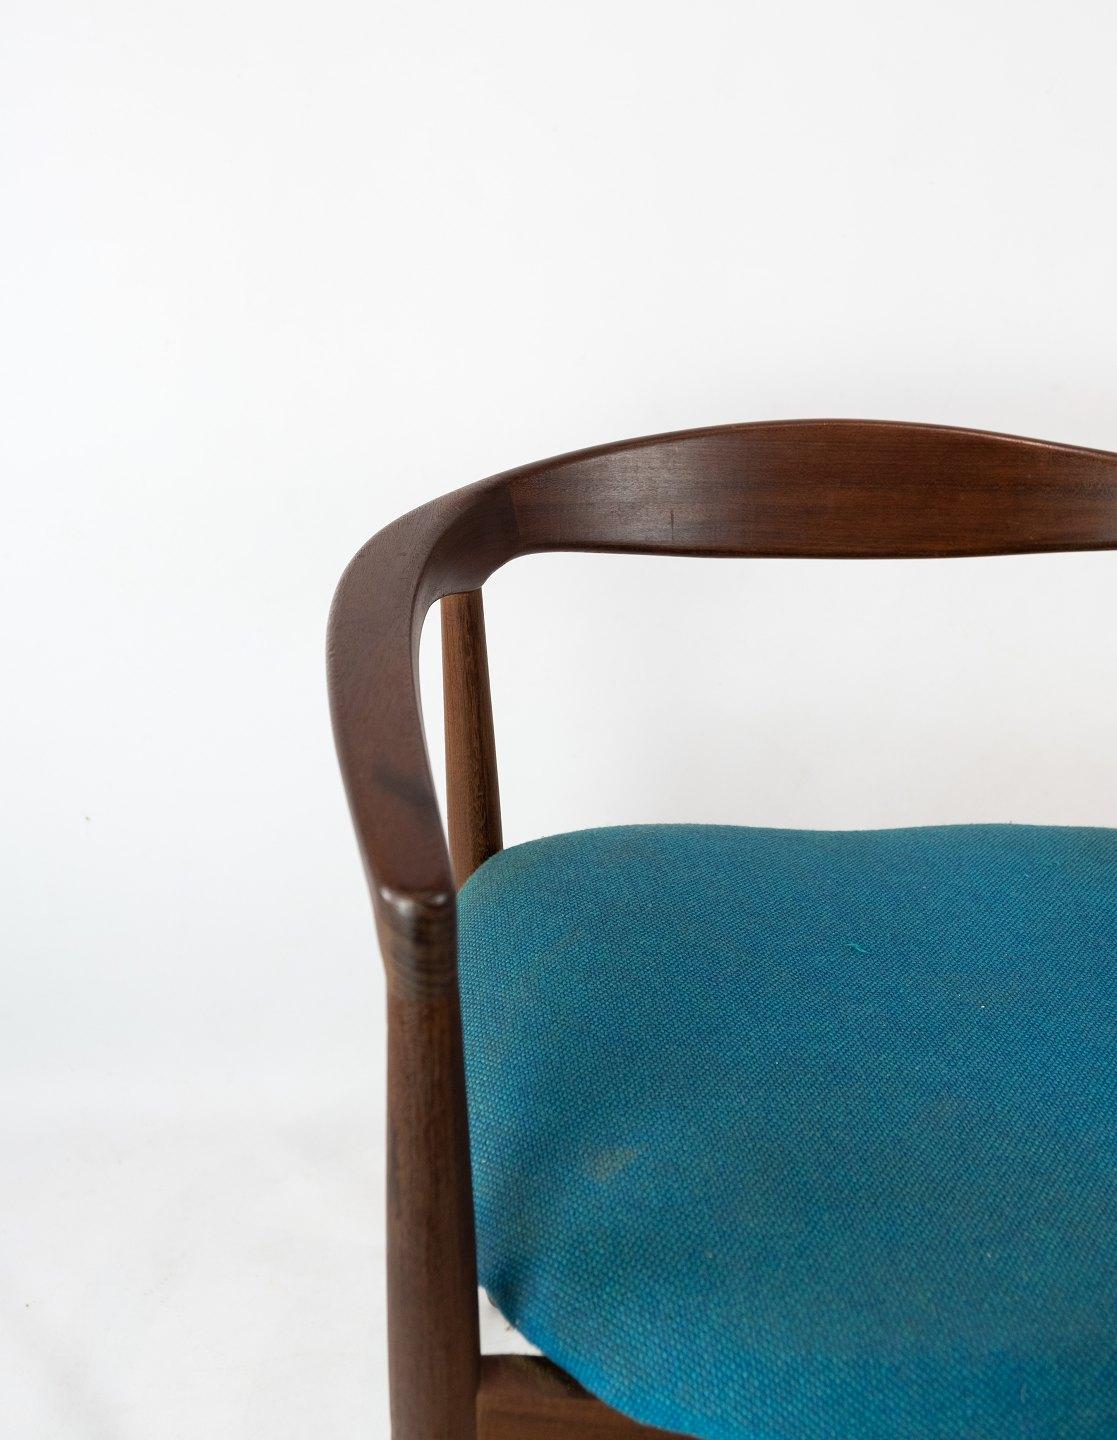 Armchair in rosewood, model Troja, upholstered with blue fabric designed by Kai Kristiansen from the 1960s. The chair is in great vintage condition.
 